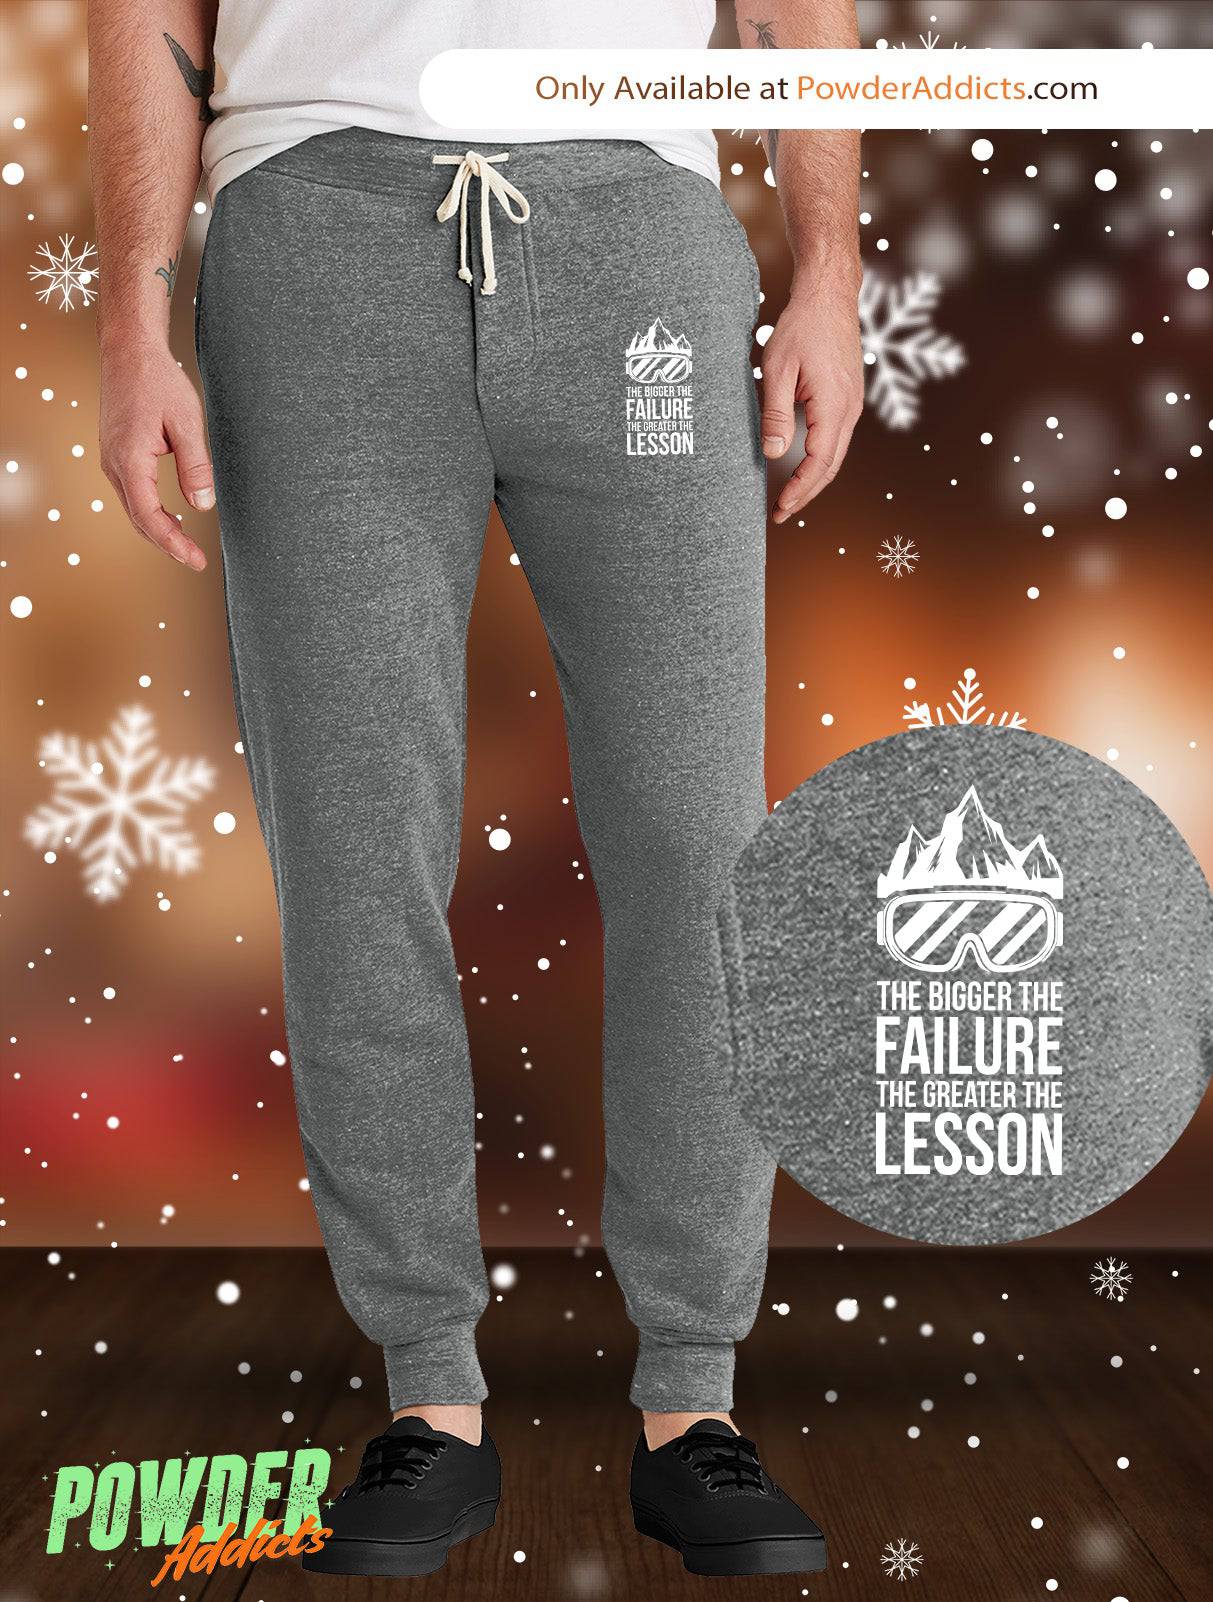 The Bigger The Failure The Greater The Lesson Men's Adult Fleece Joggers - Powderaddicts